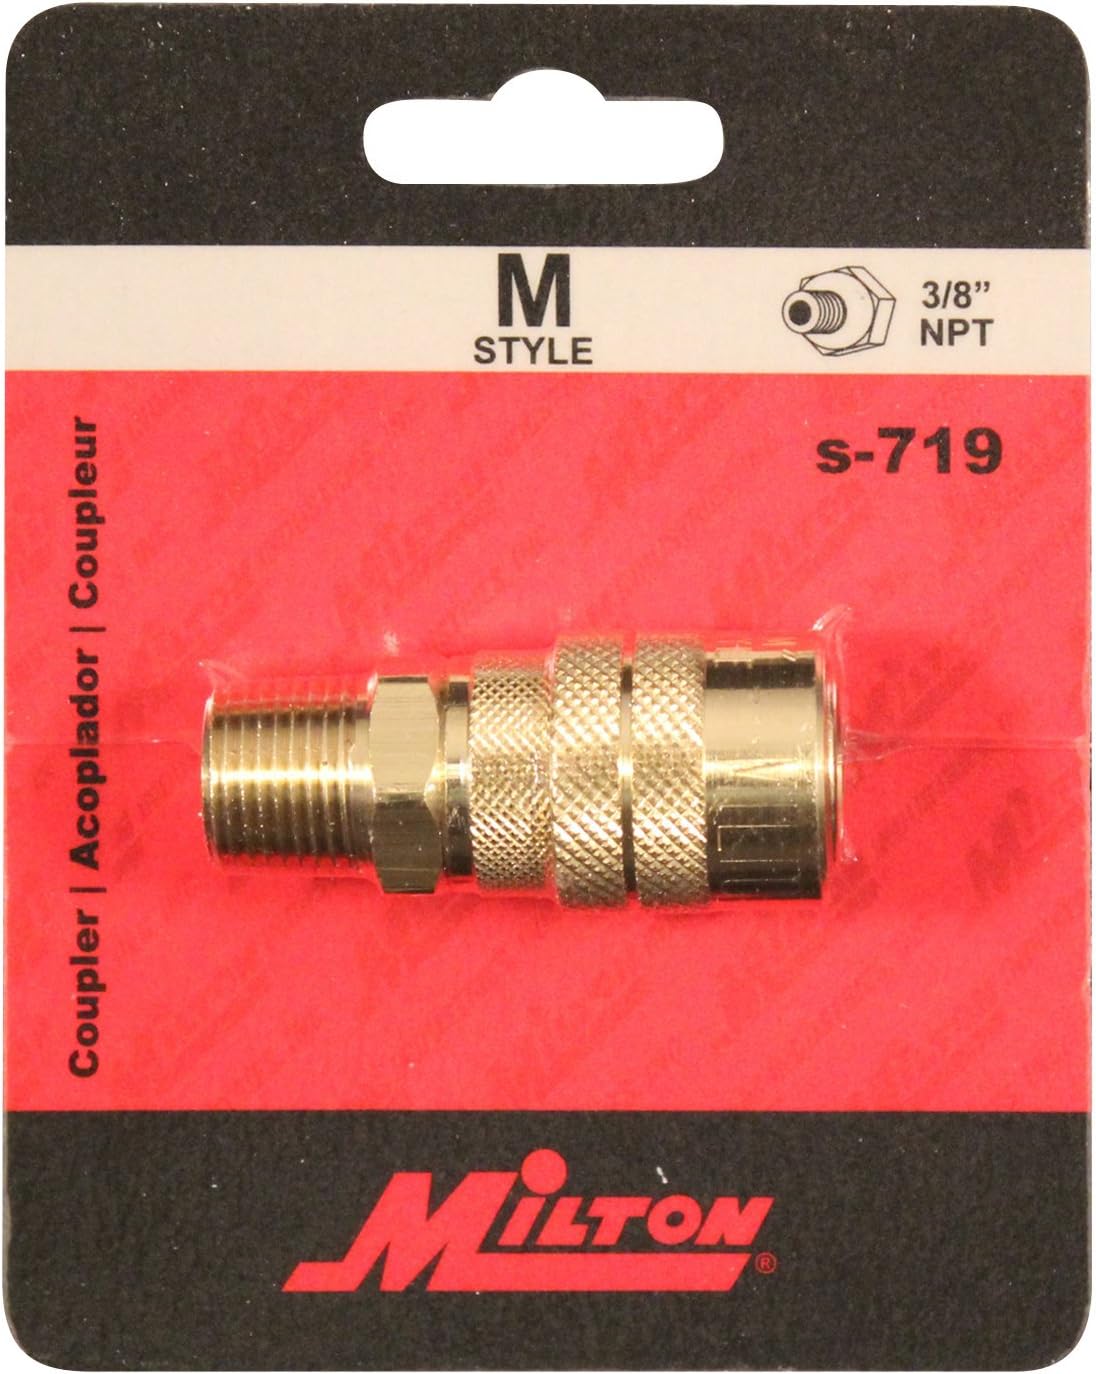 MILTON "M" Style 3/8" NPT Male Coupler Body Made in U.S.A. 3